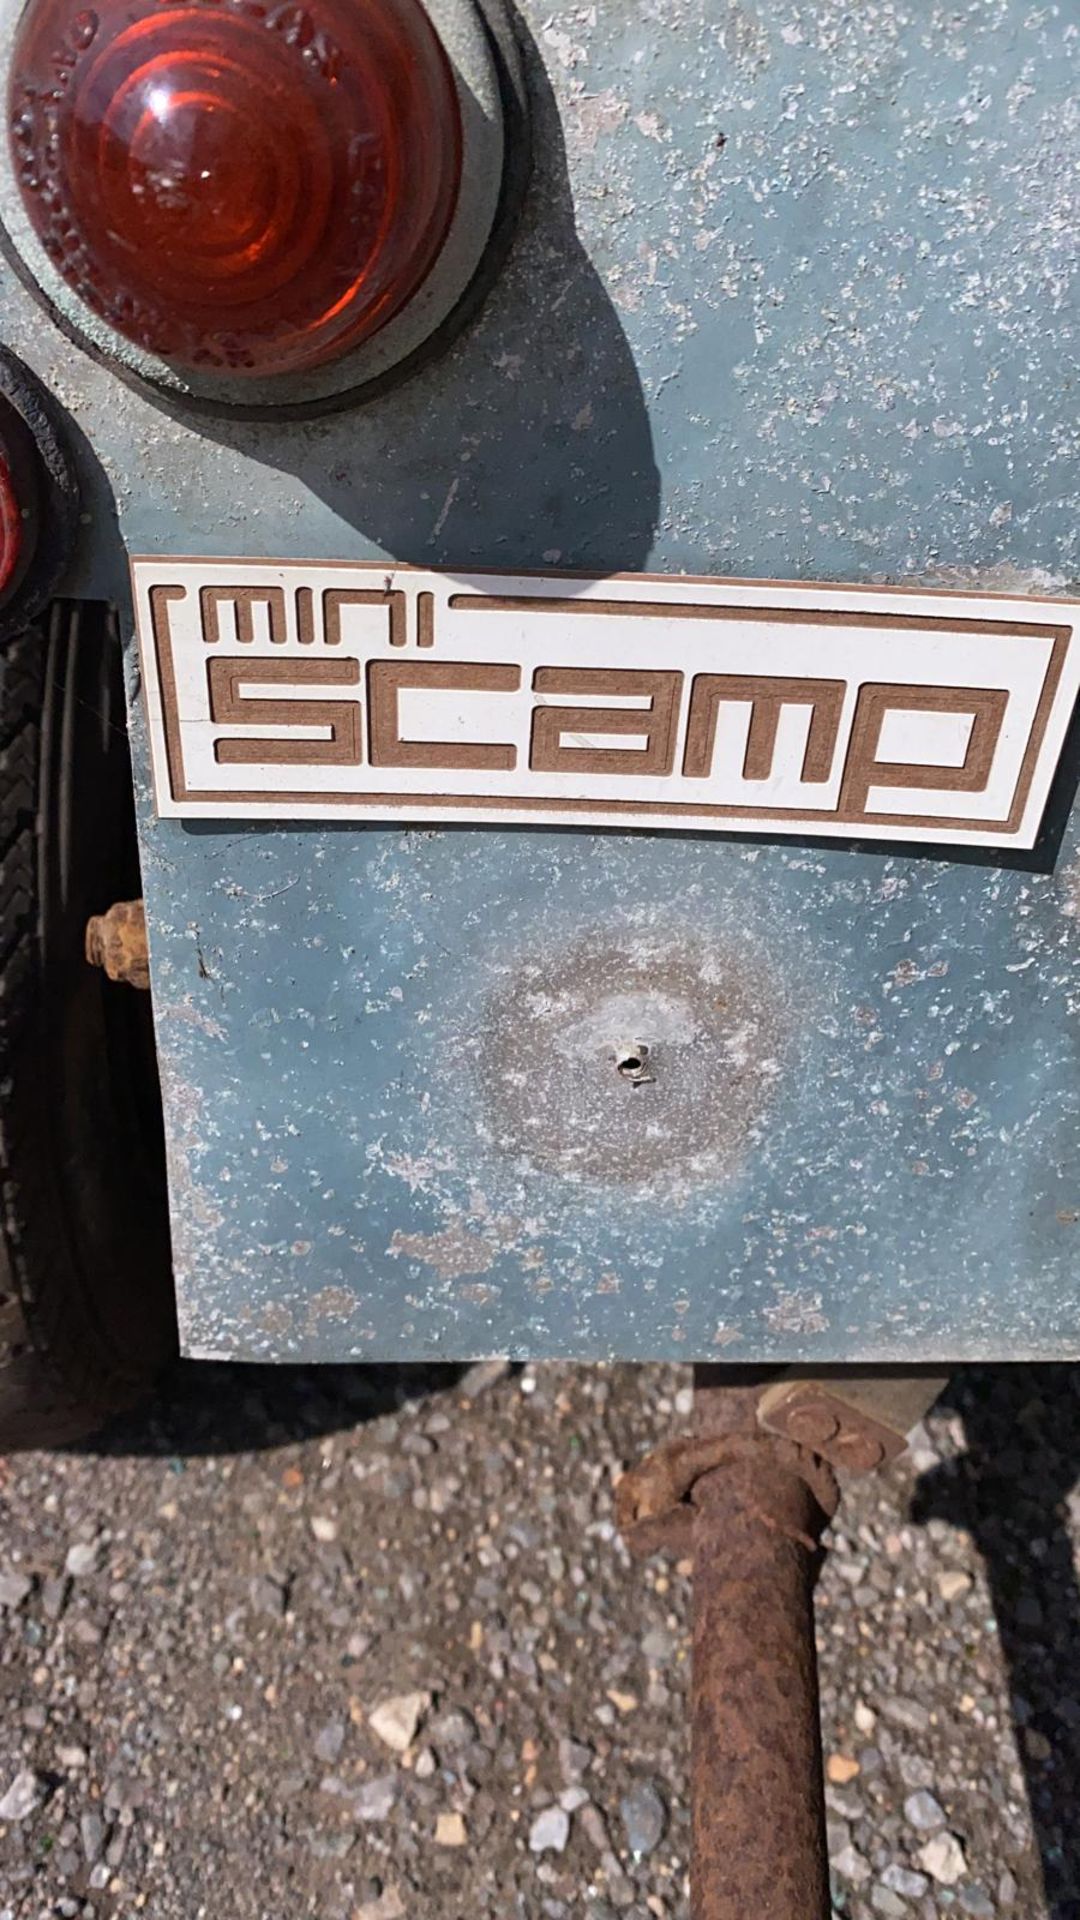 1977 MINISCAMP BUGGY 998CC PETROL SILVER, V5 PRESENT - BARN FIND! - Image 8 of 17